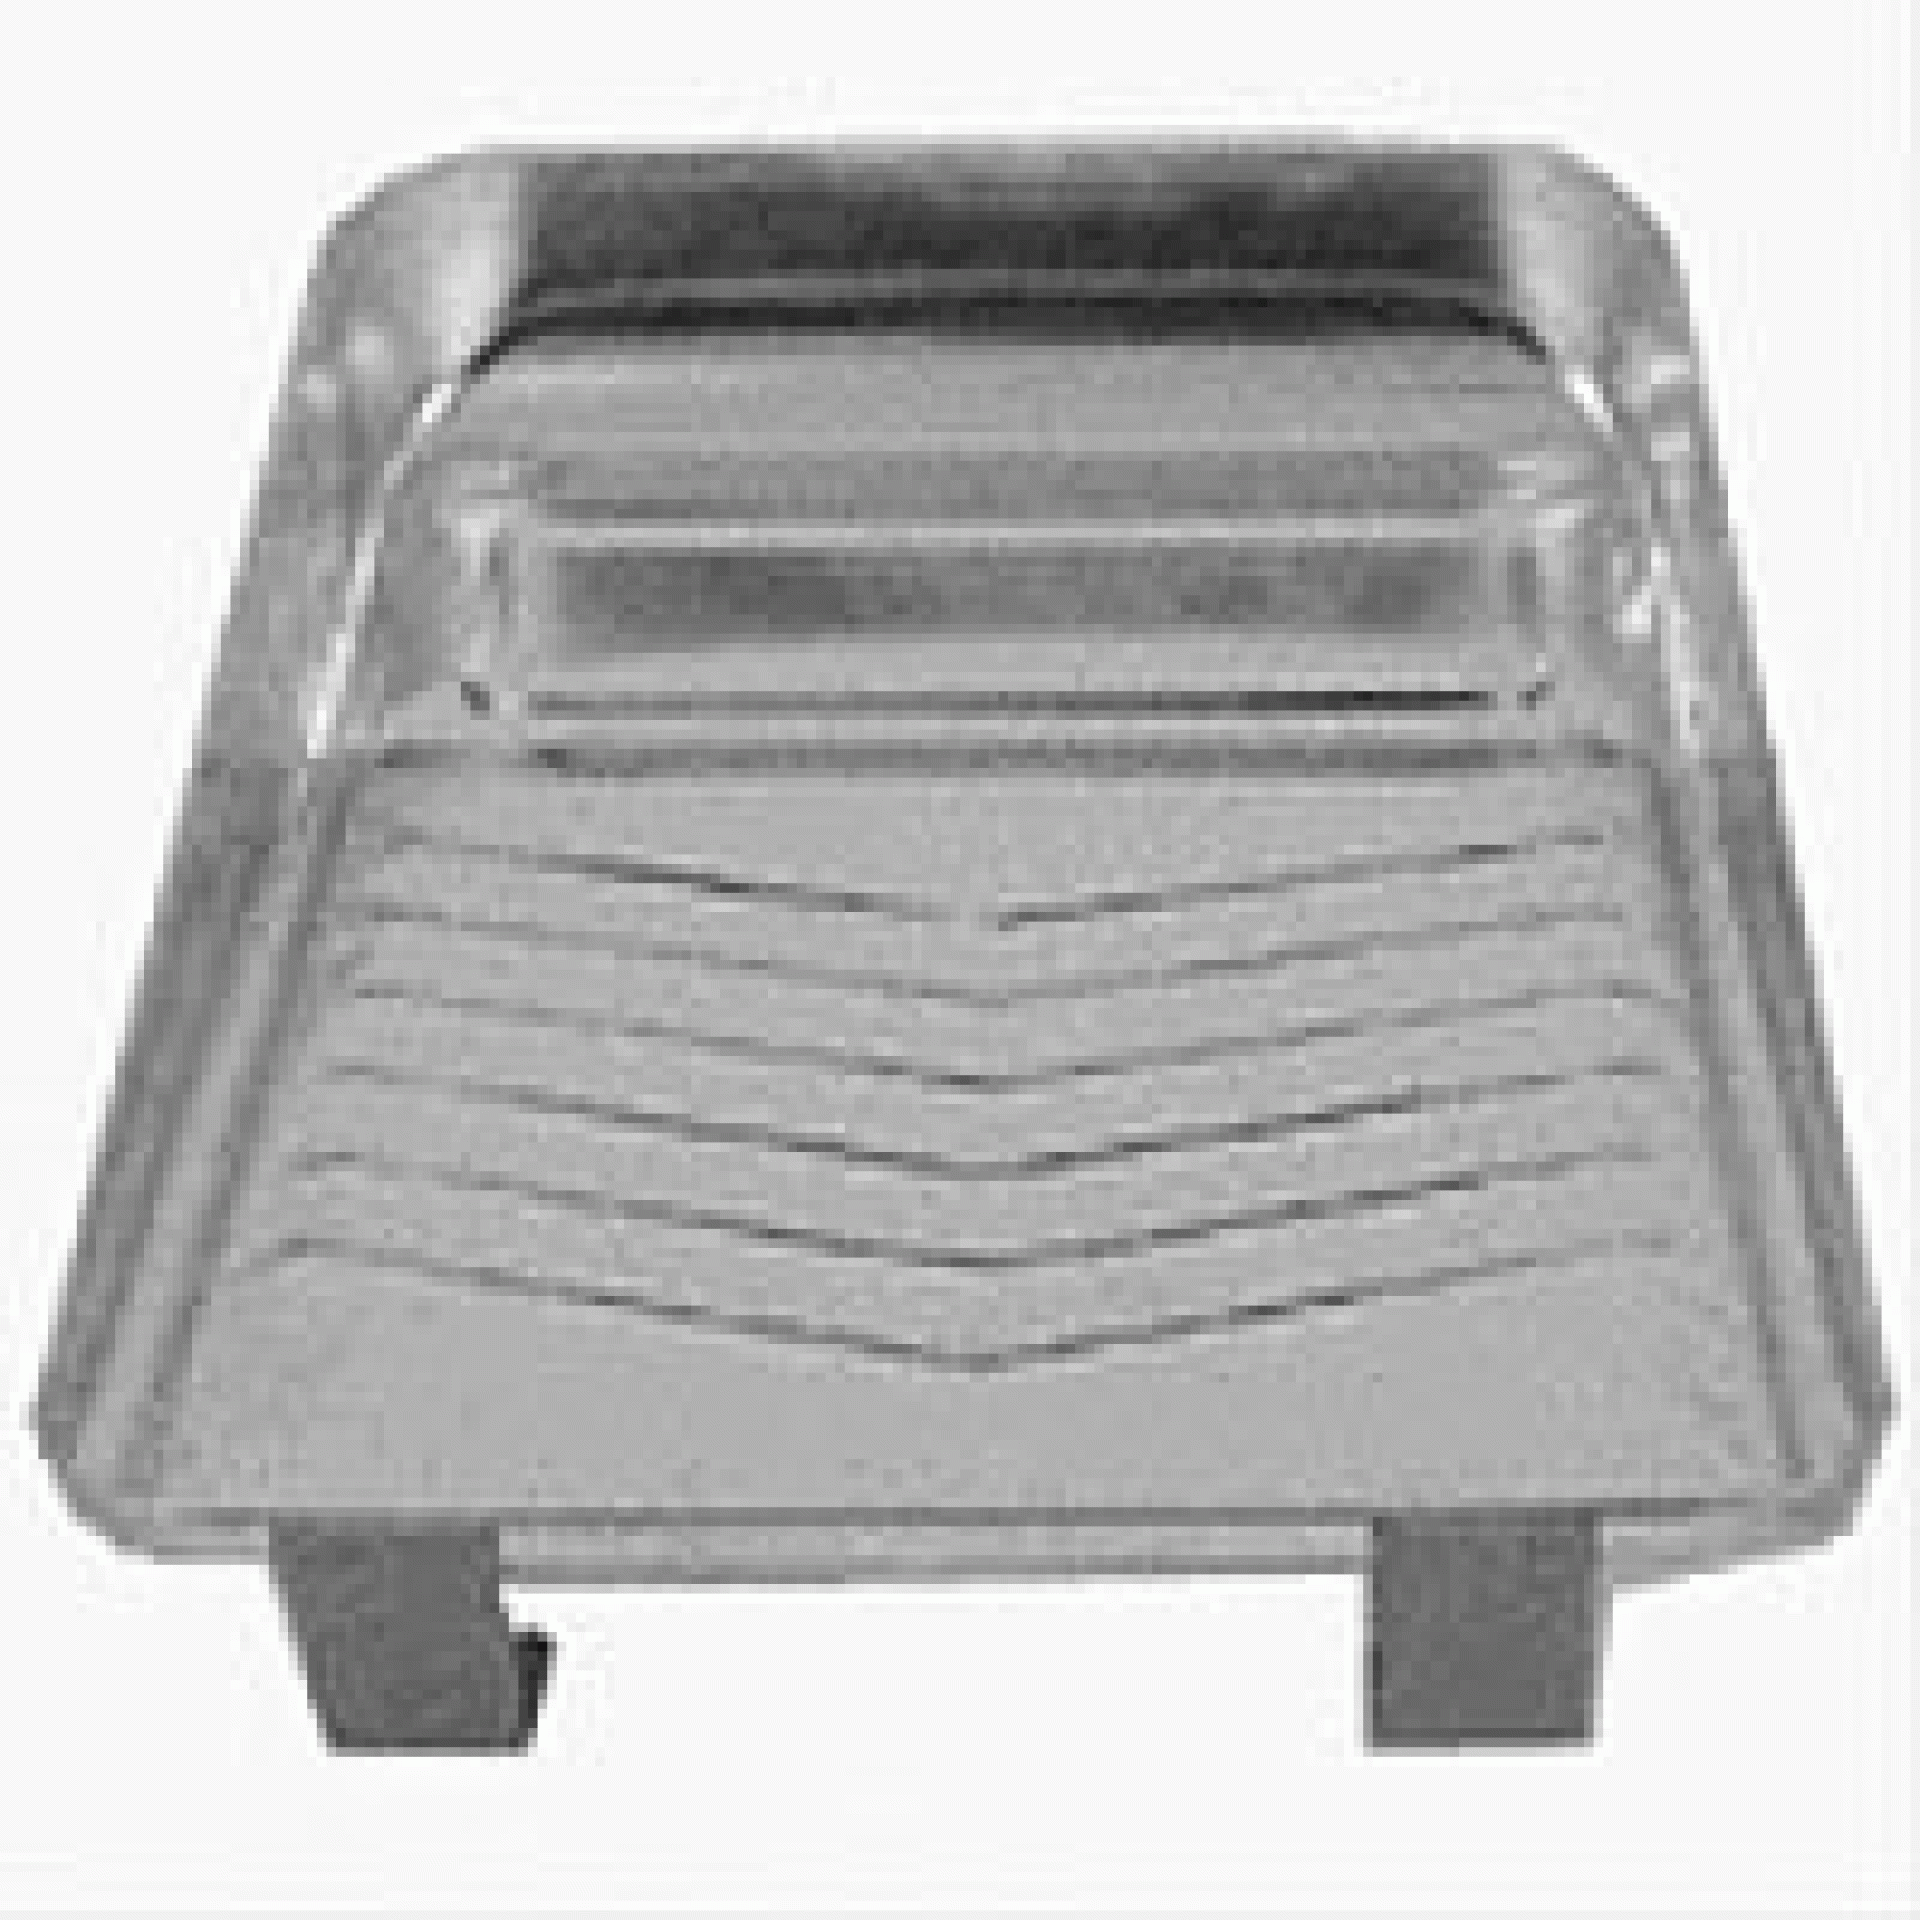 LINZER PRODUCTS | RM 400 | PAINT ROLLER TRAY 1 QUART - METAL